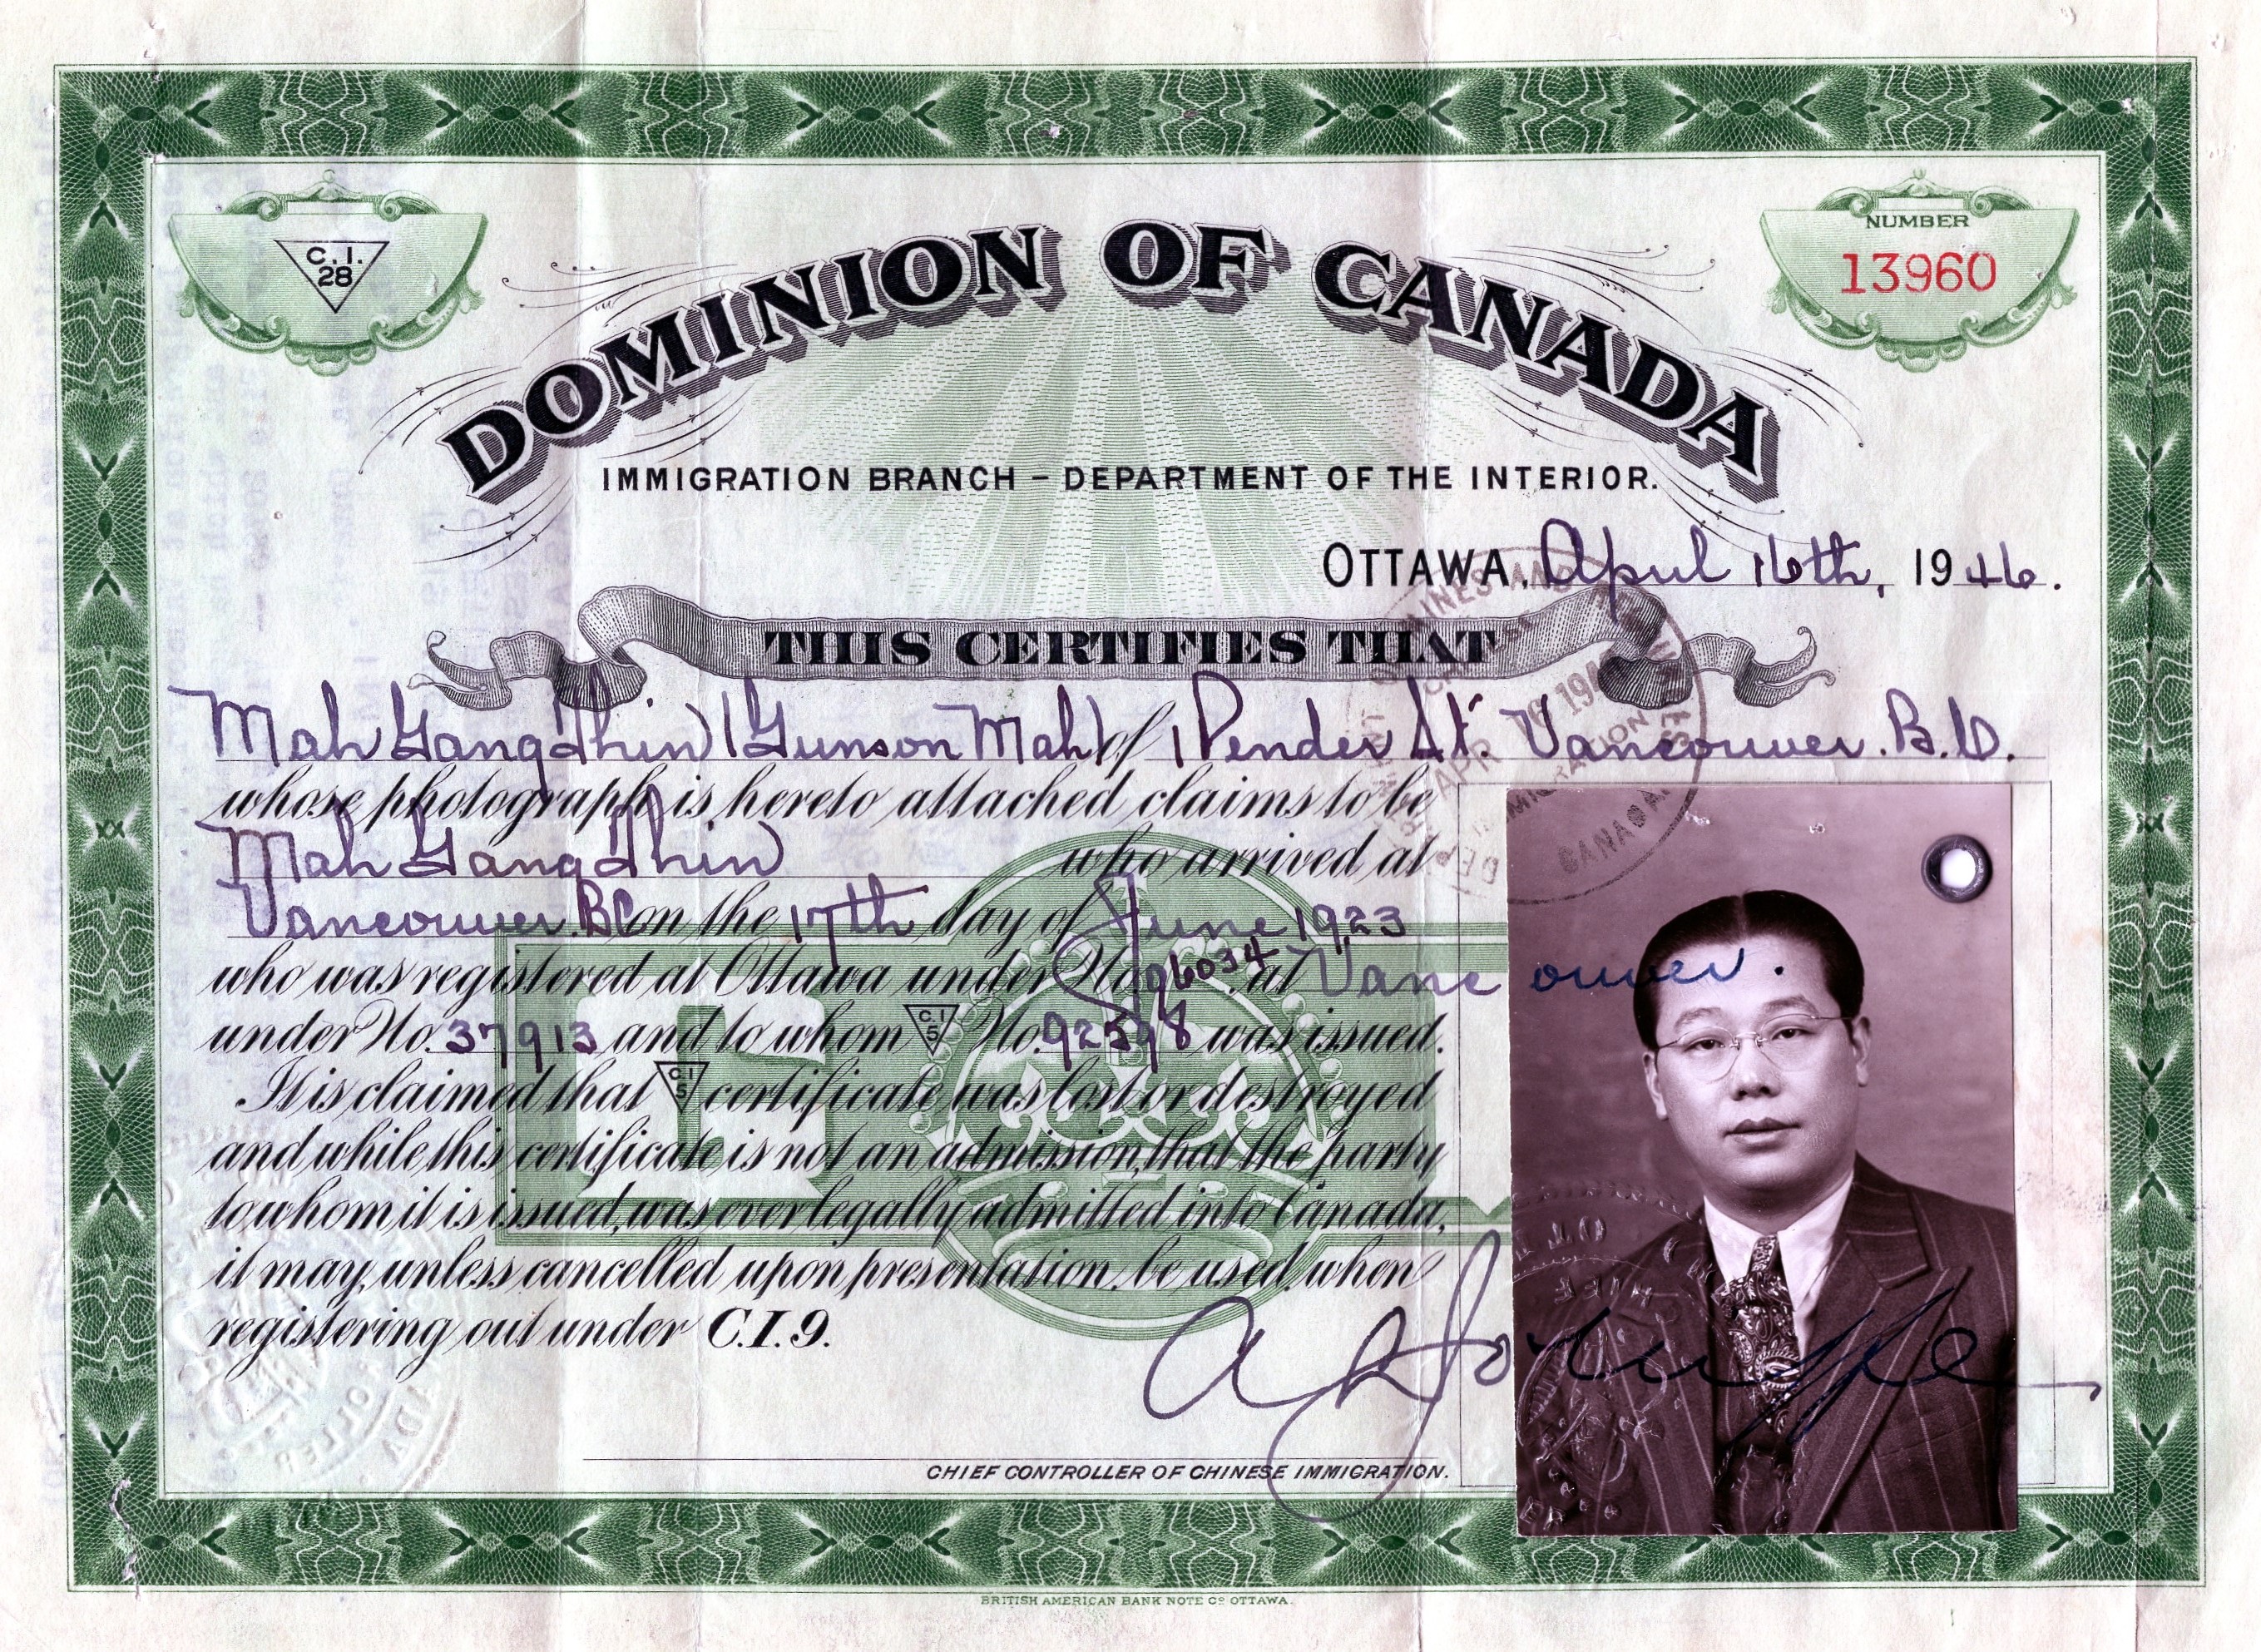 Chinese immigration certificate (replacement). 16 April 1946. Courtesy of the Mah family.